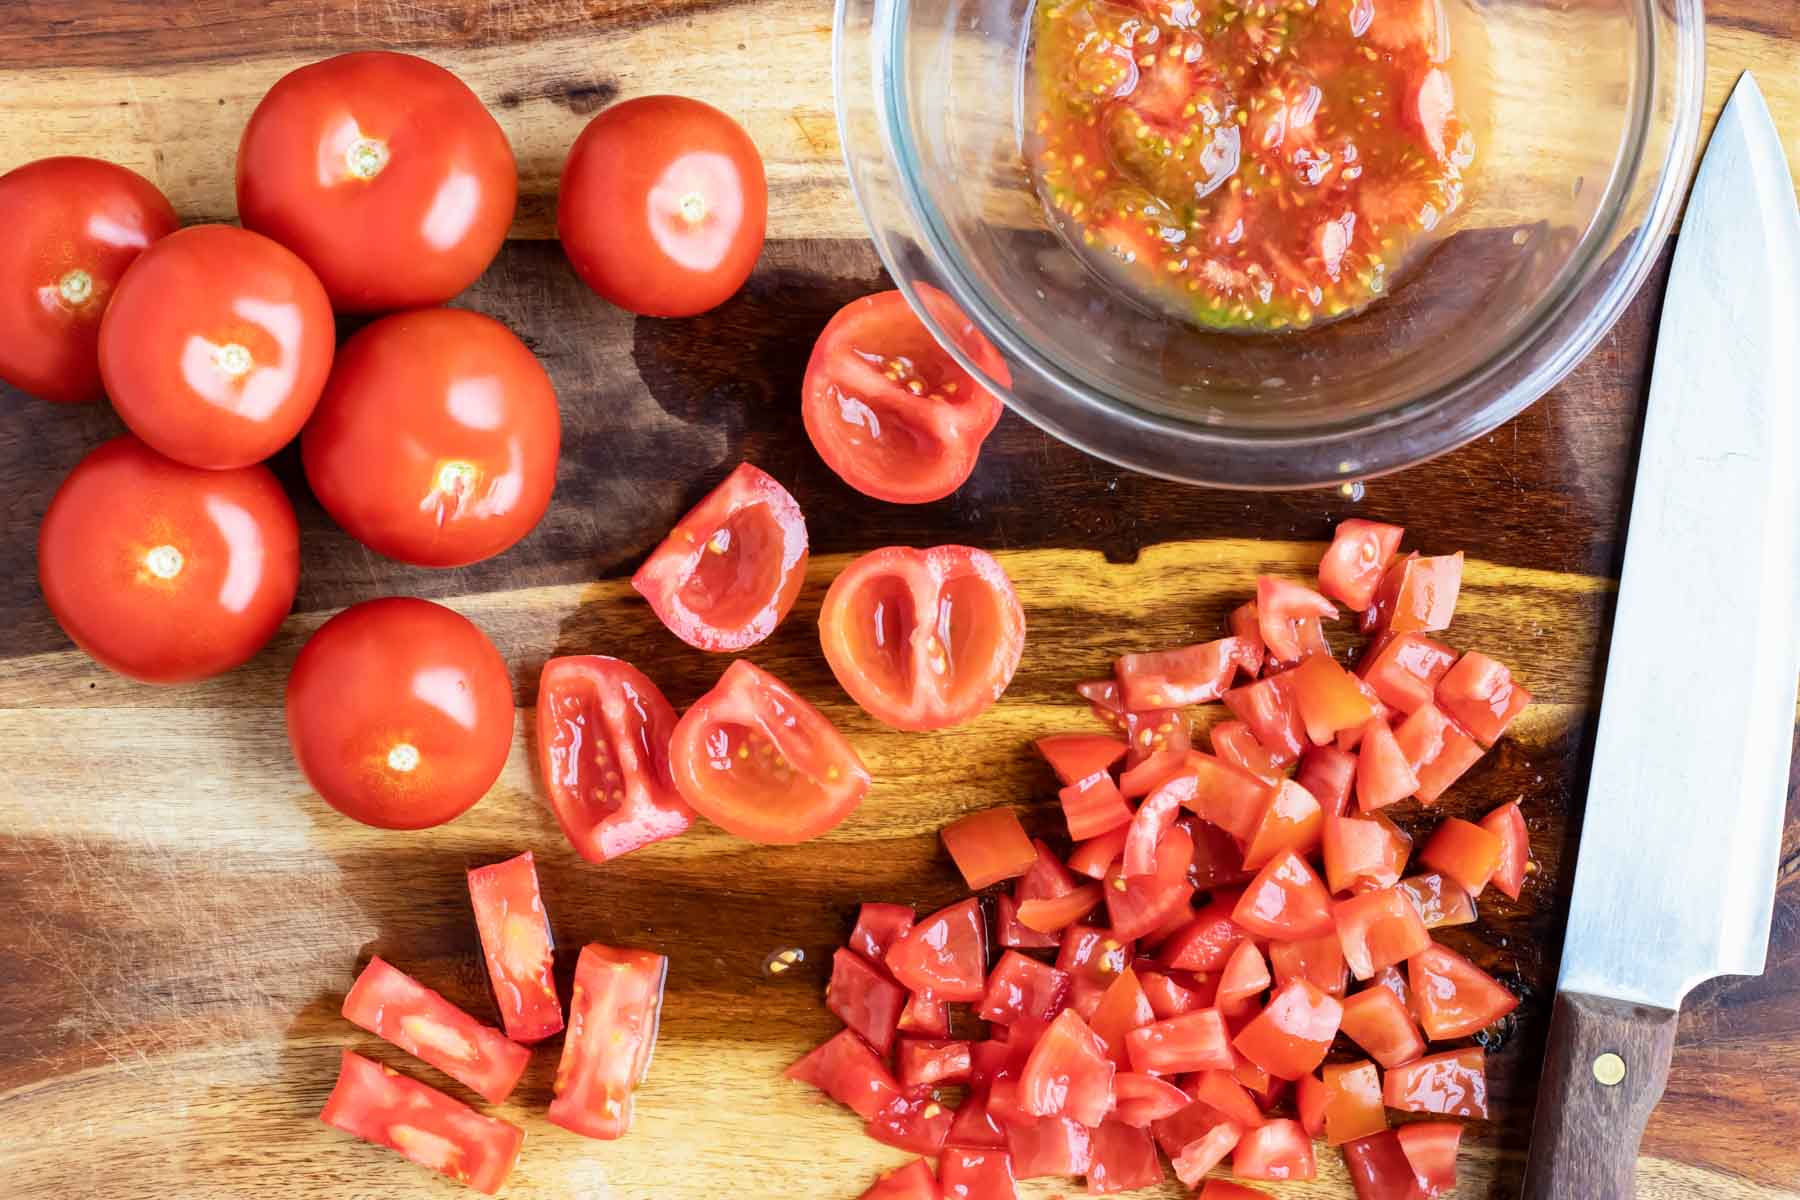 Finely diced tomatoes on a wooden cutting board for a homemade pomodoro sauce recipe.